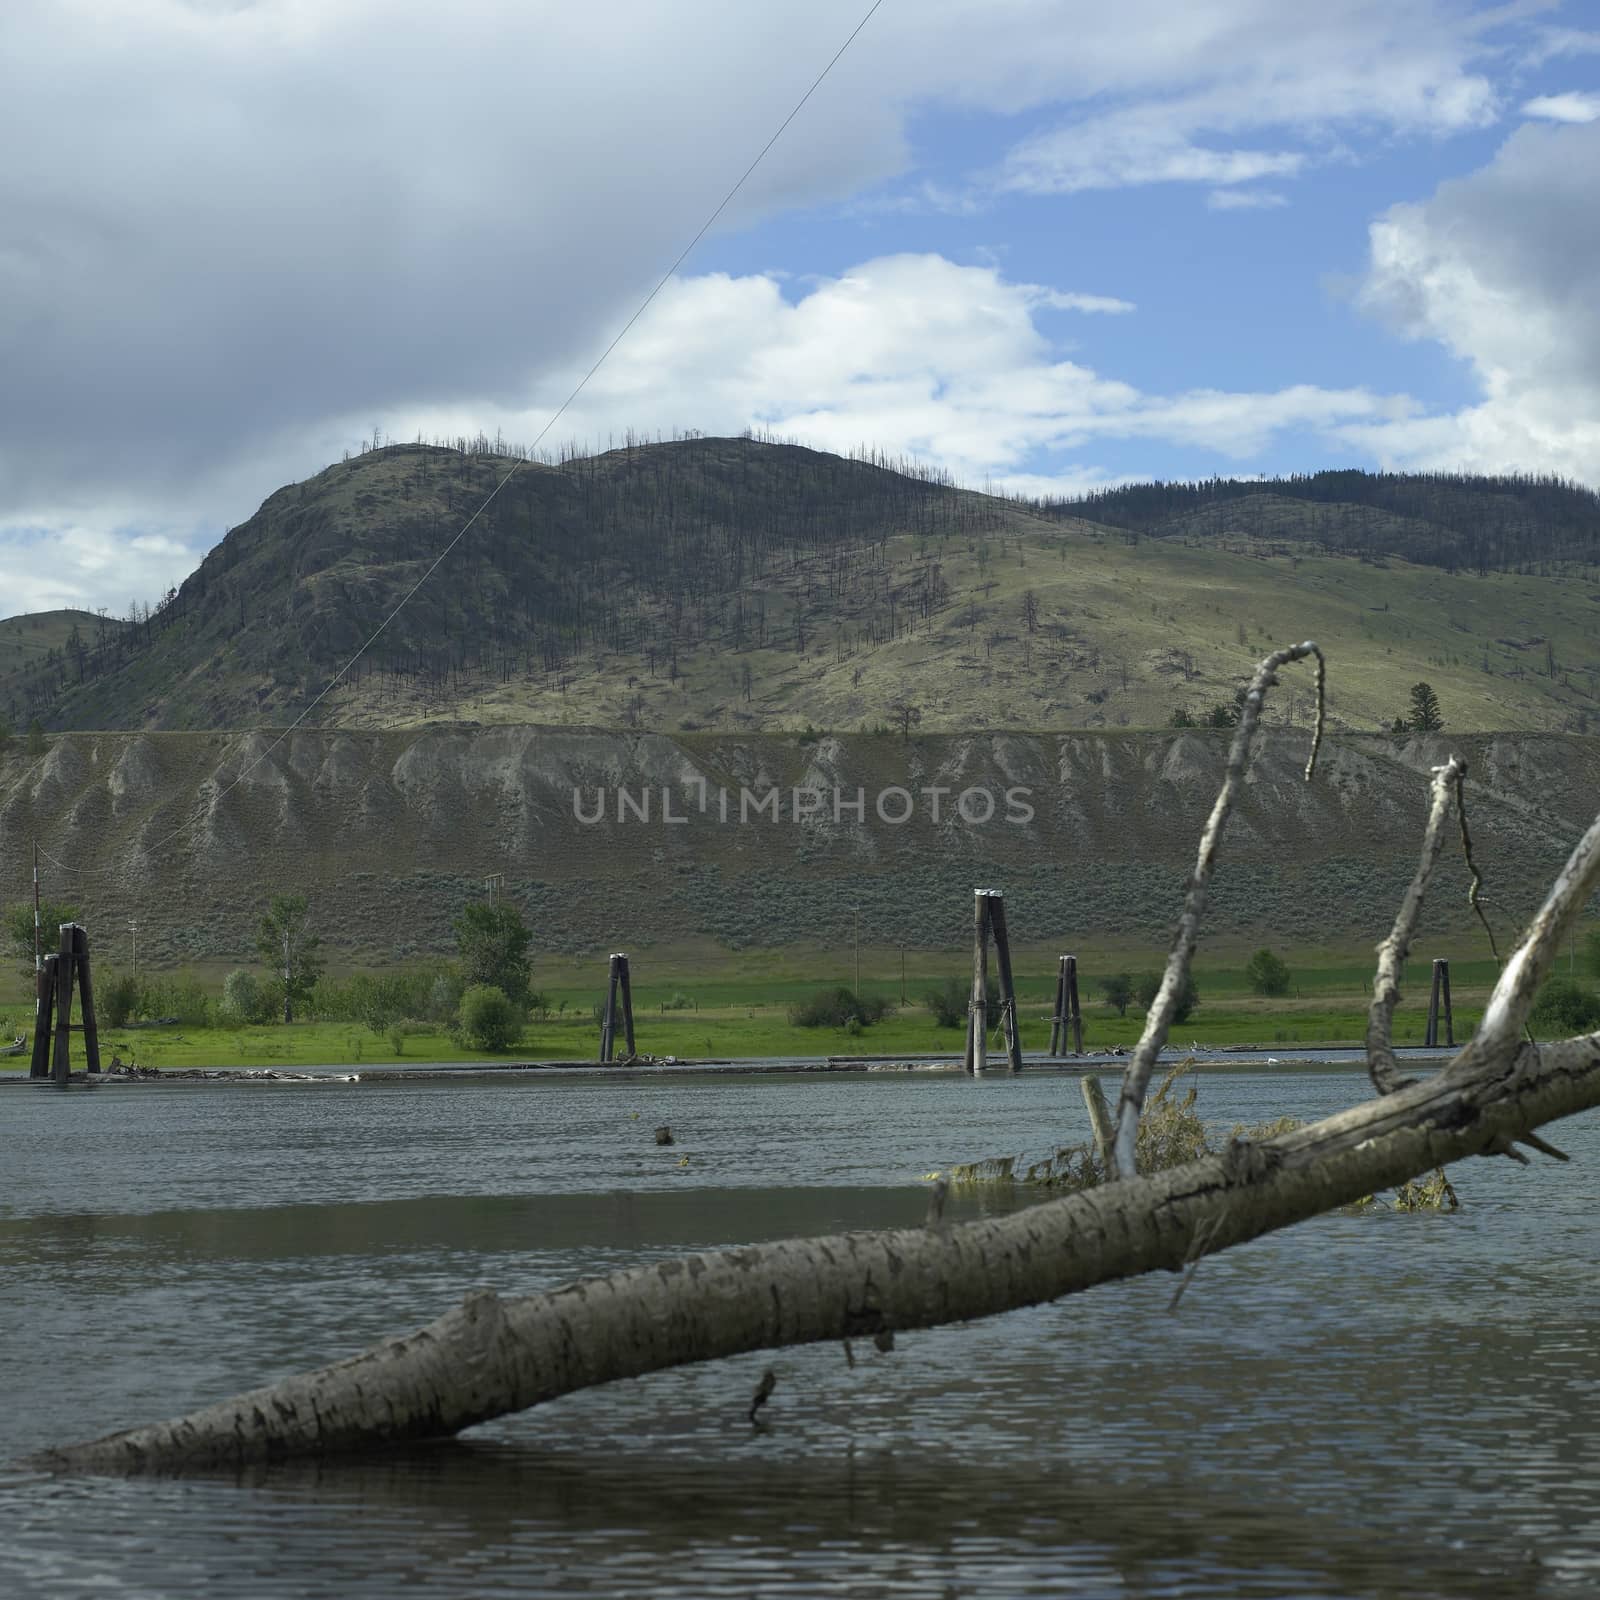 A tree jutting out of a calm lake in the mountains with man made wooden structures 